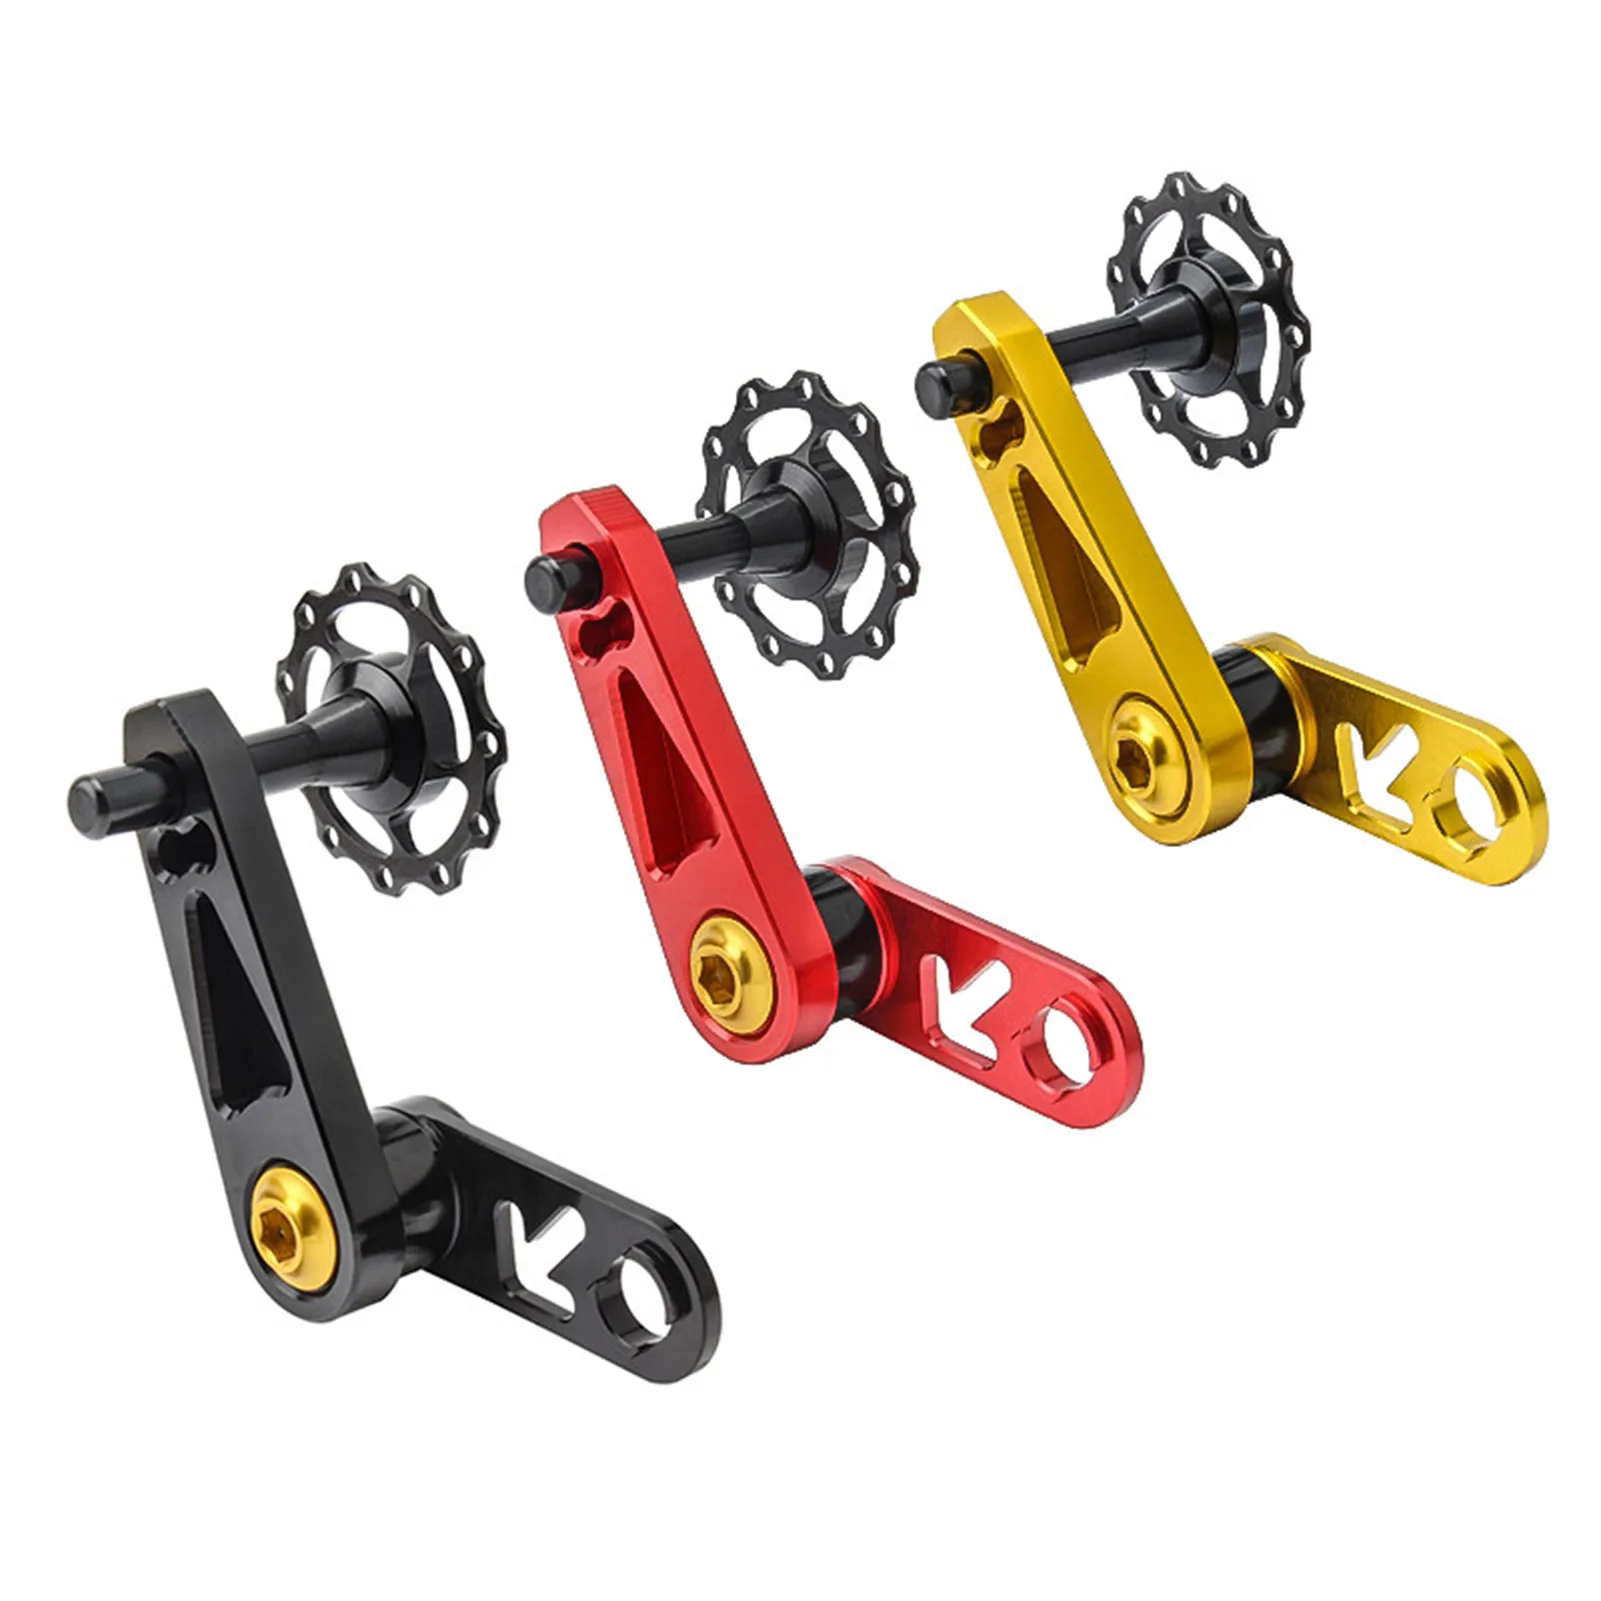 

MUQZI Single speed Folding Bicycle Rear Derailleur Chain Guide Oval Plate Modified Crimping Chain Device To Prevent Chain Fallin